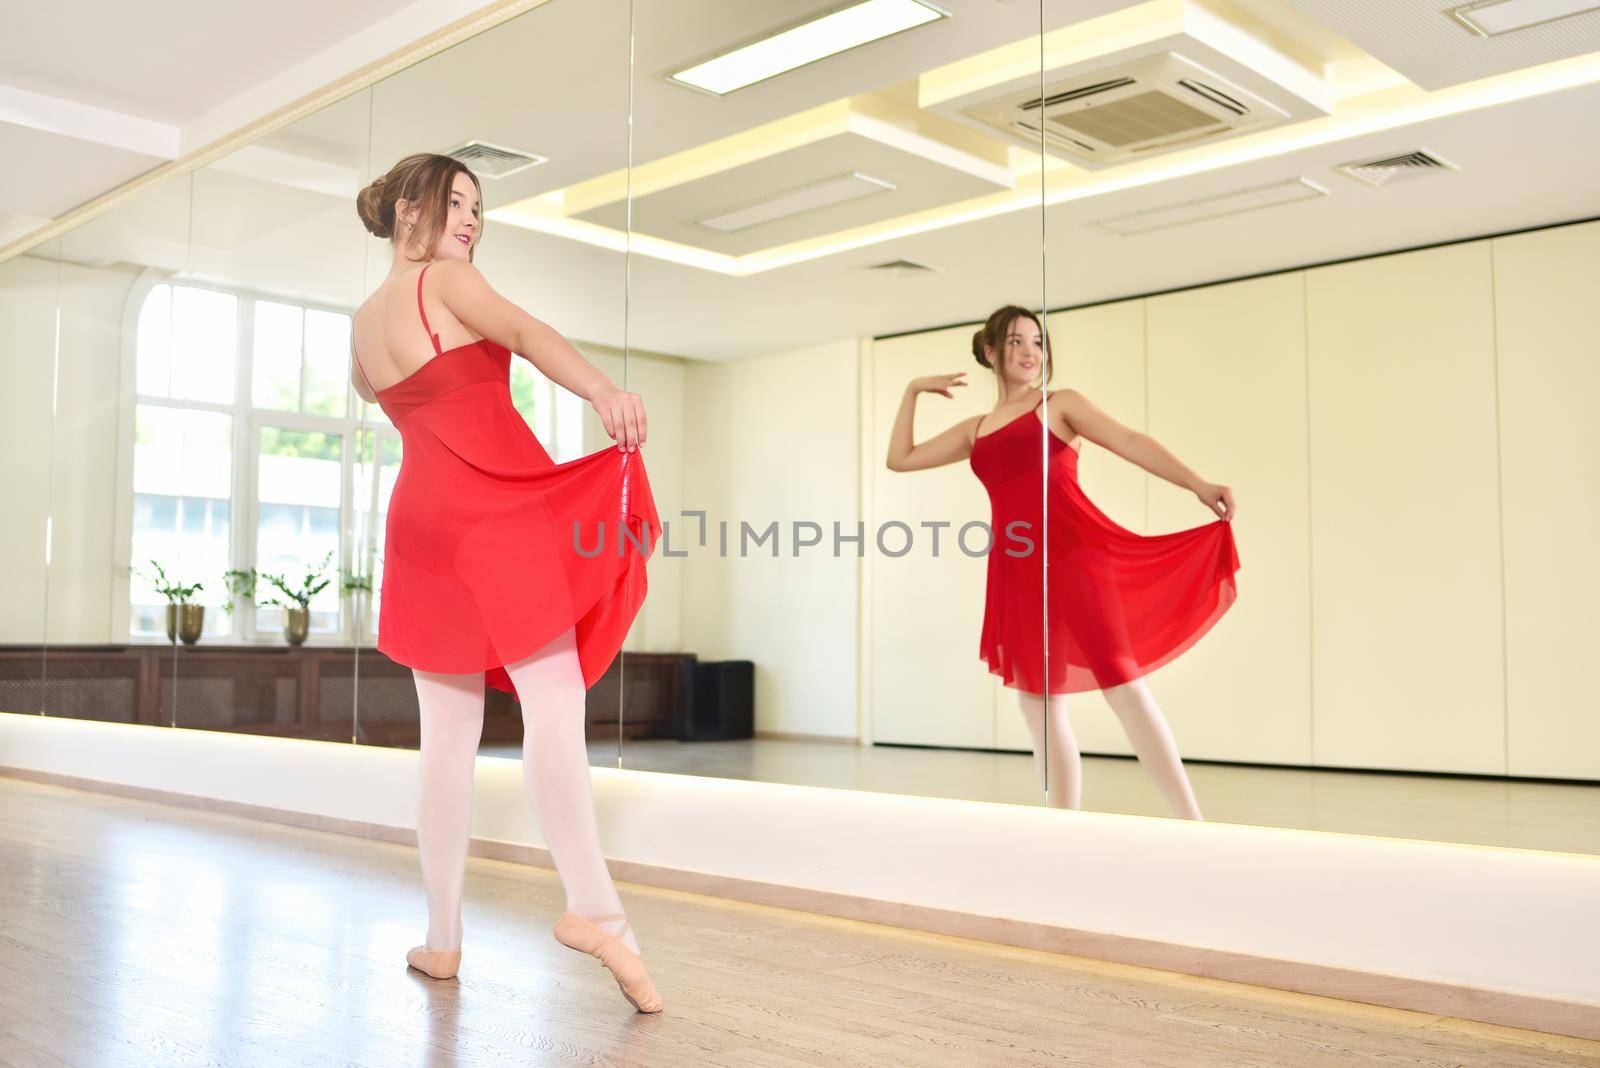 a young ballerina in a red dress and pointe shoes performs exercises in a dance studio